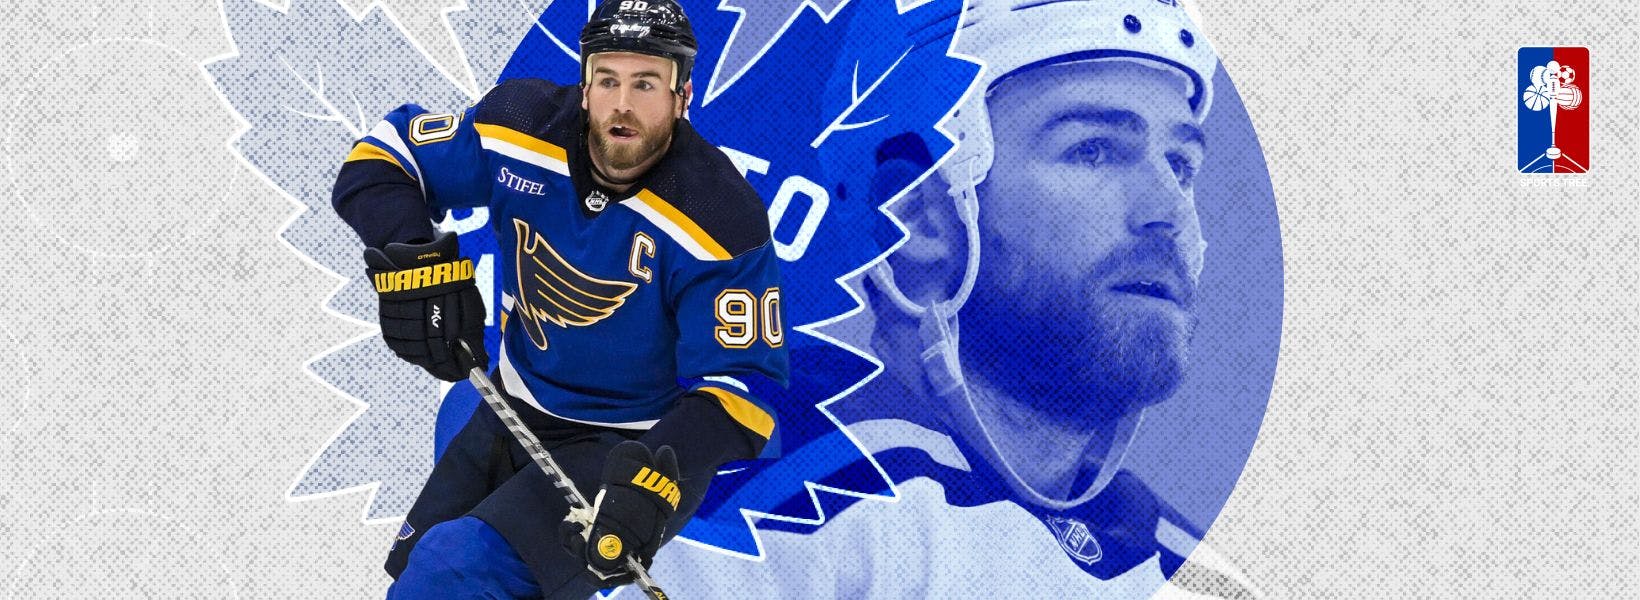 St Louis Blues Captain Ryan O’Reilly has been traded to the Toronto Maple Leafs